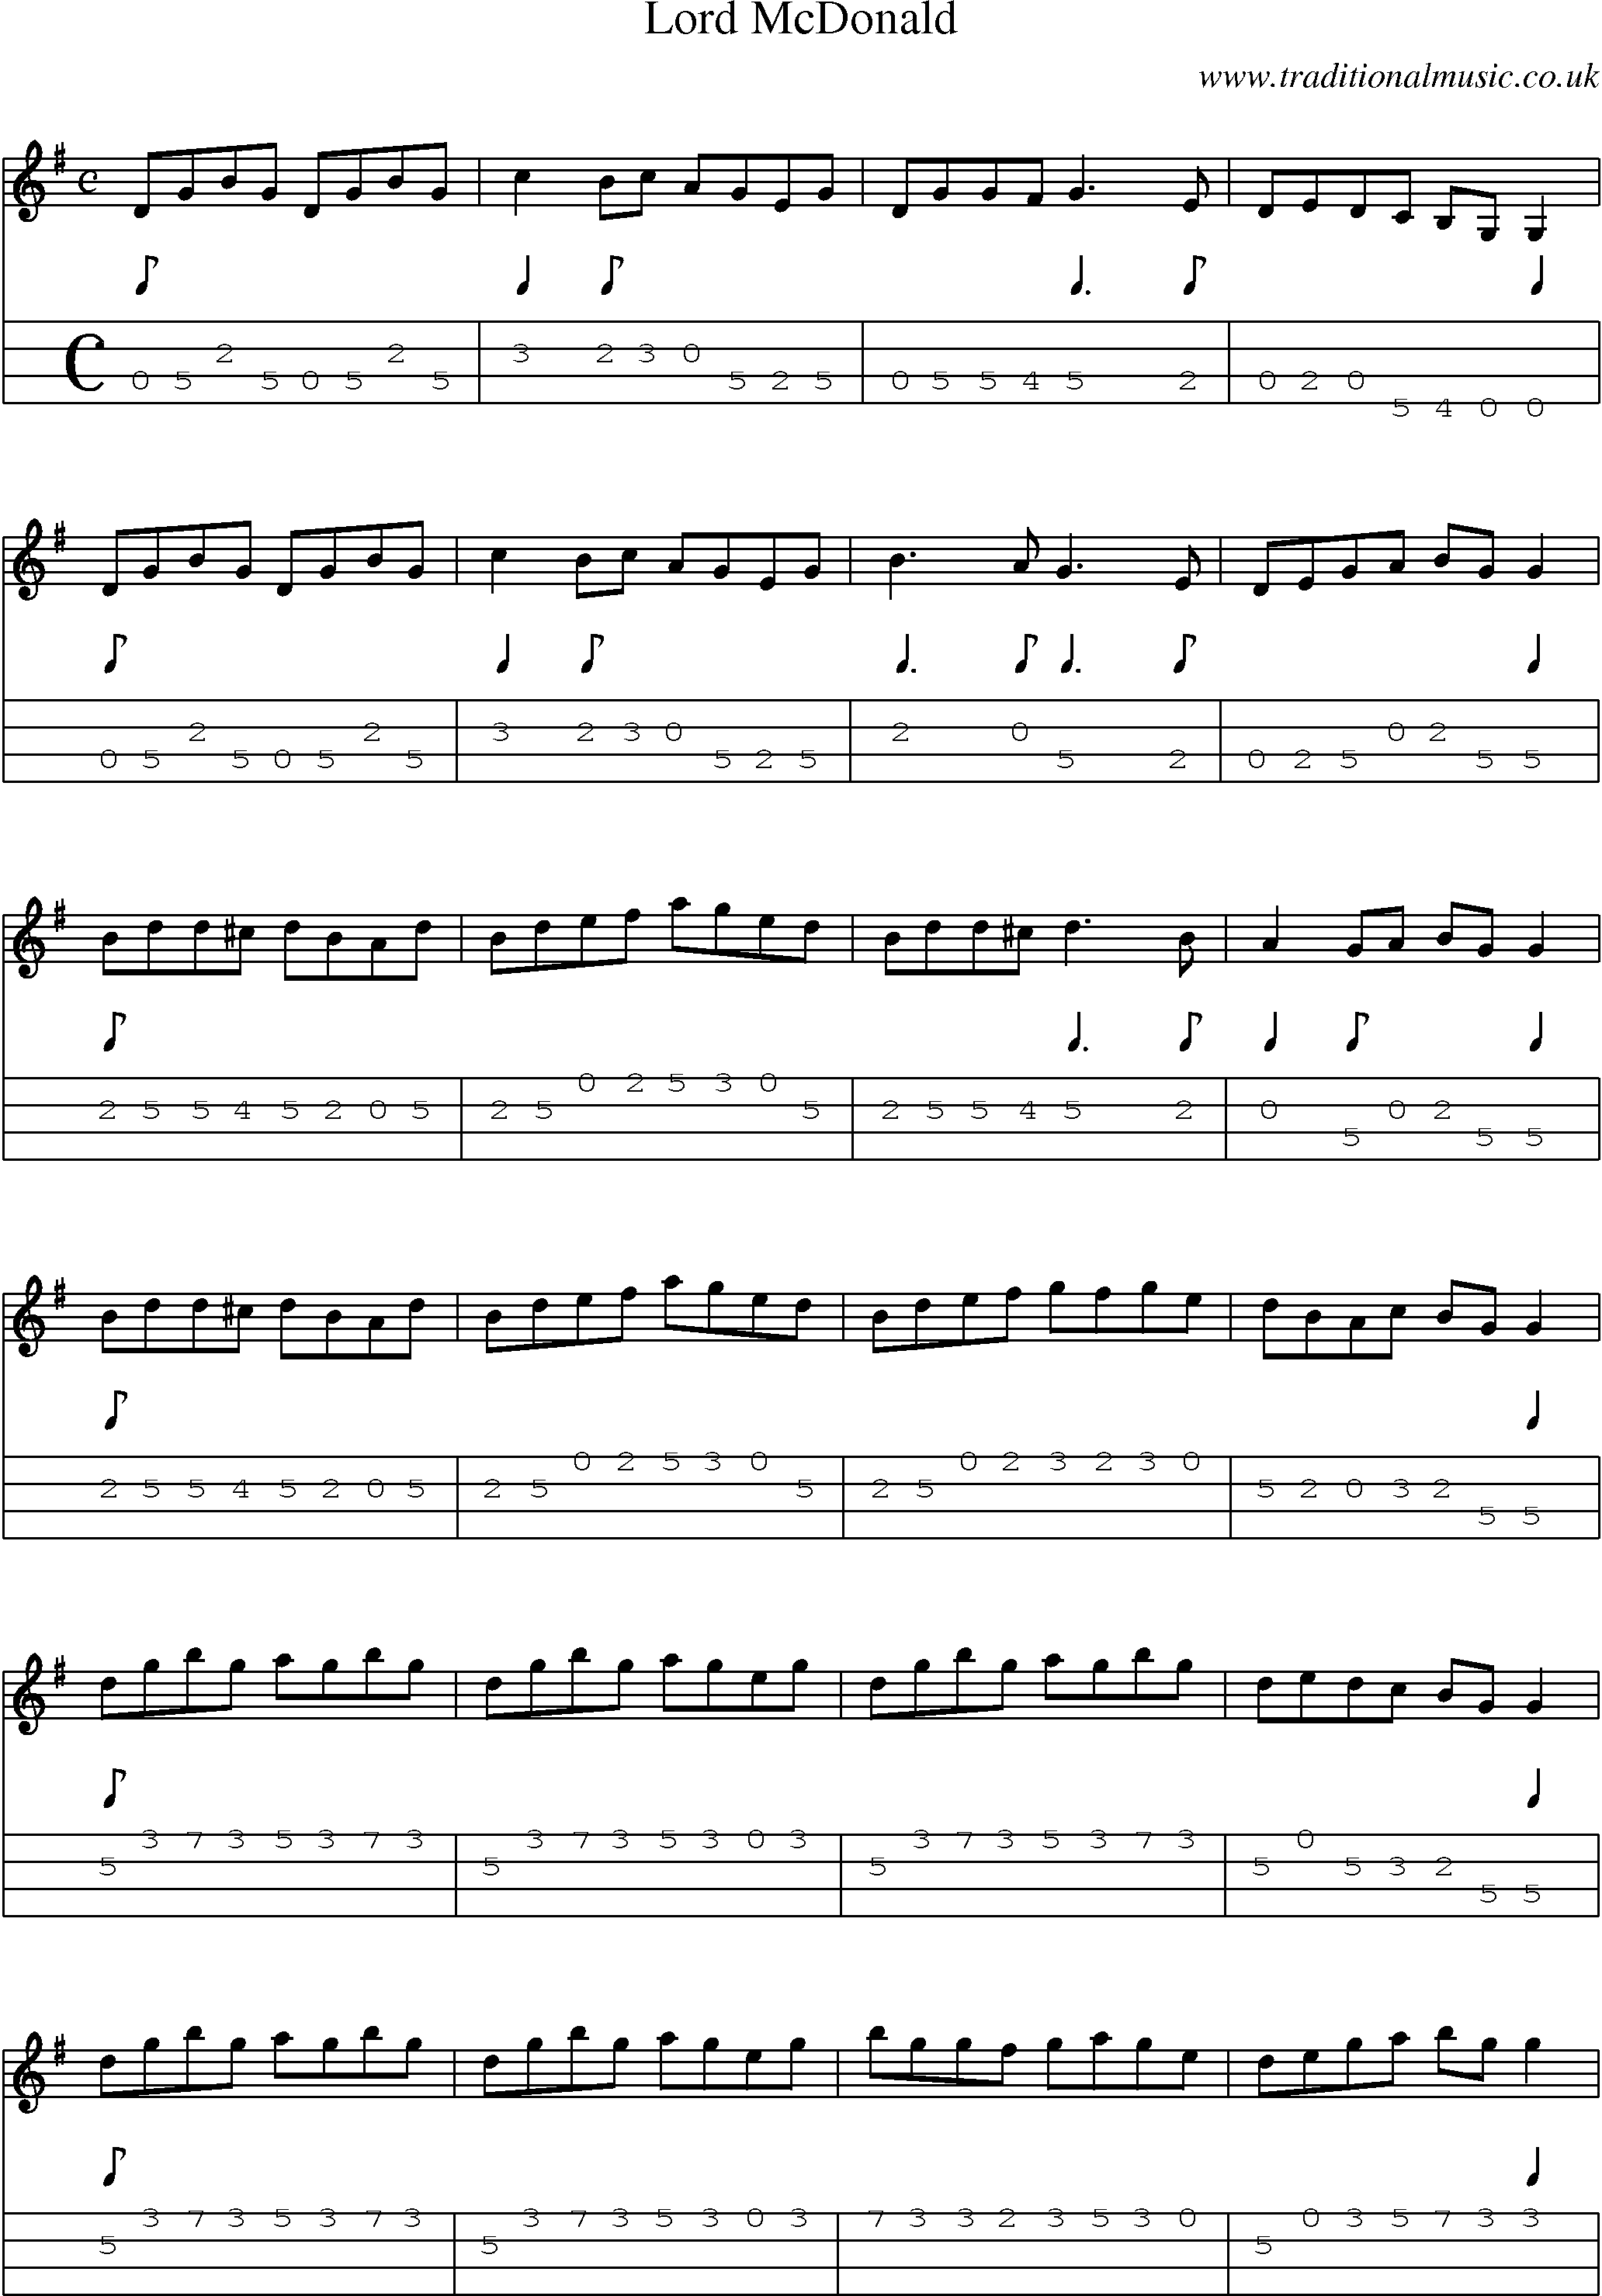 Music Score and Mandolin Tabs for Lord Mcdonald